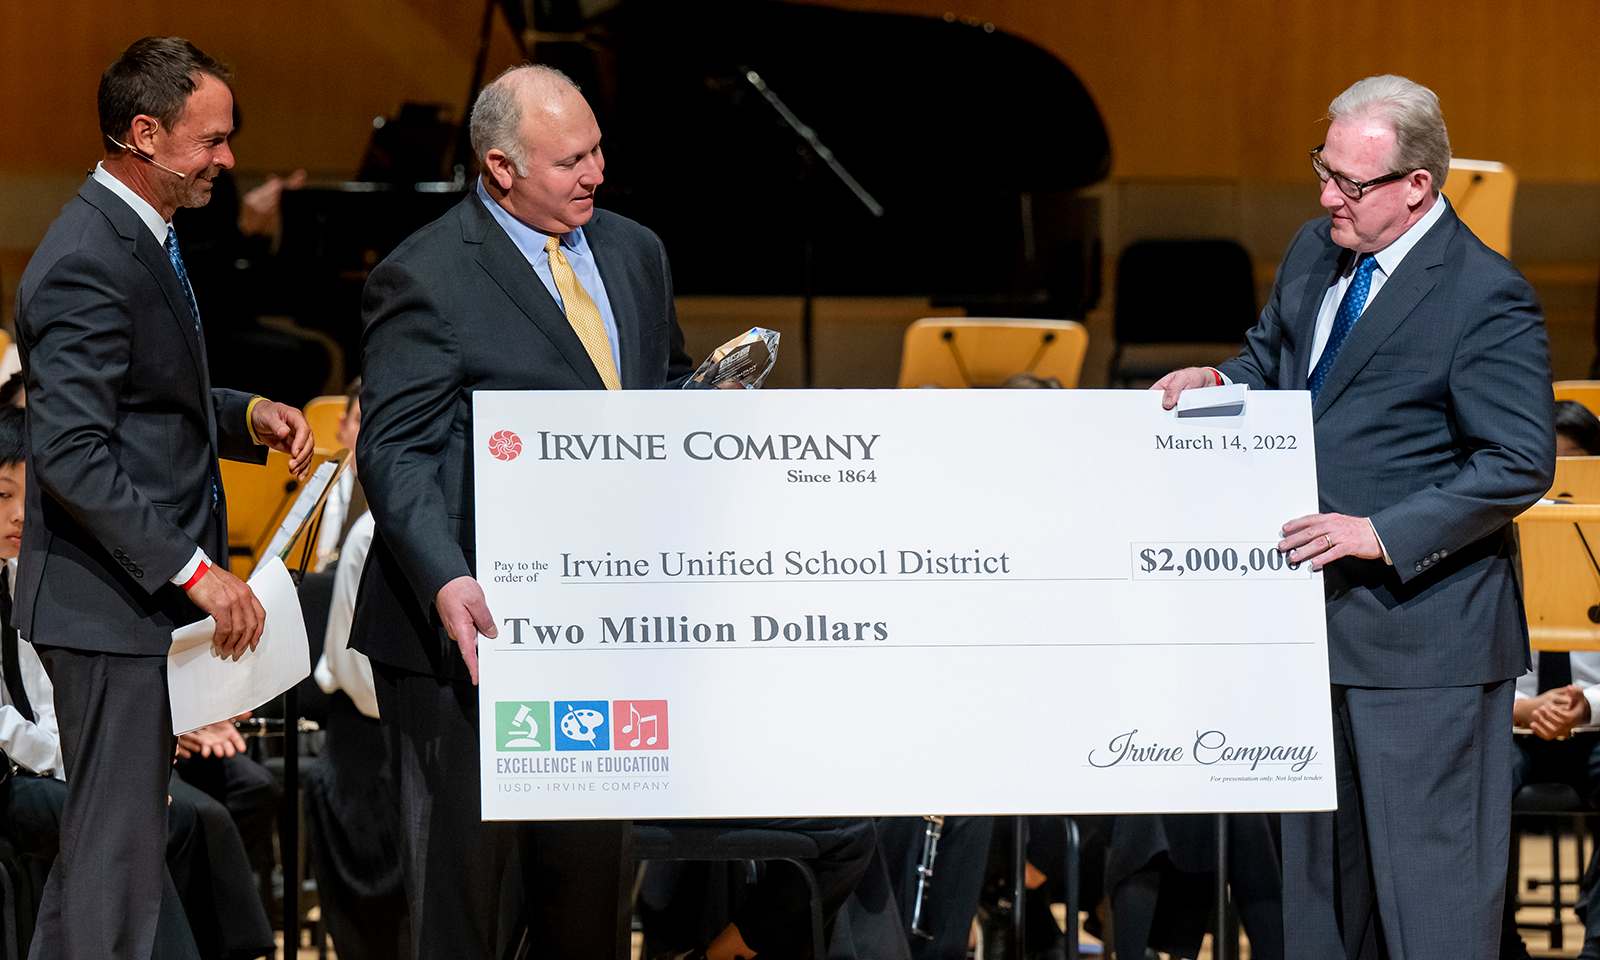 IUSD ushers in its 50th anniversary celebration with $2 million contribution by Irvine Company